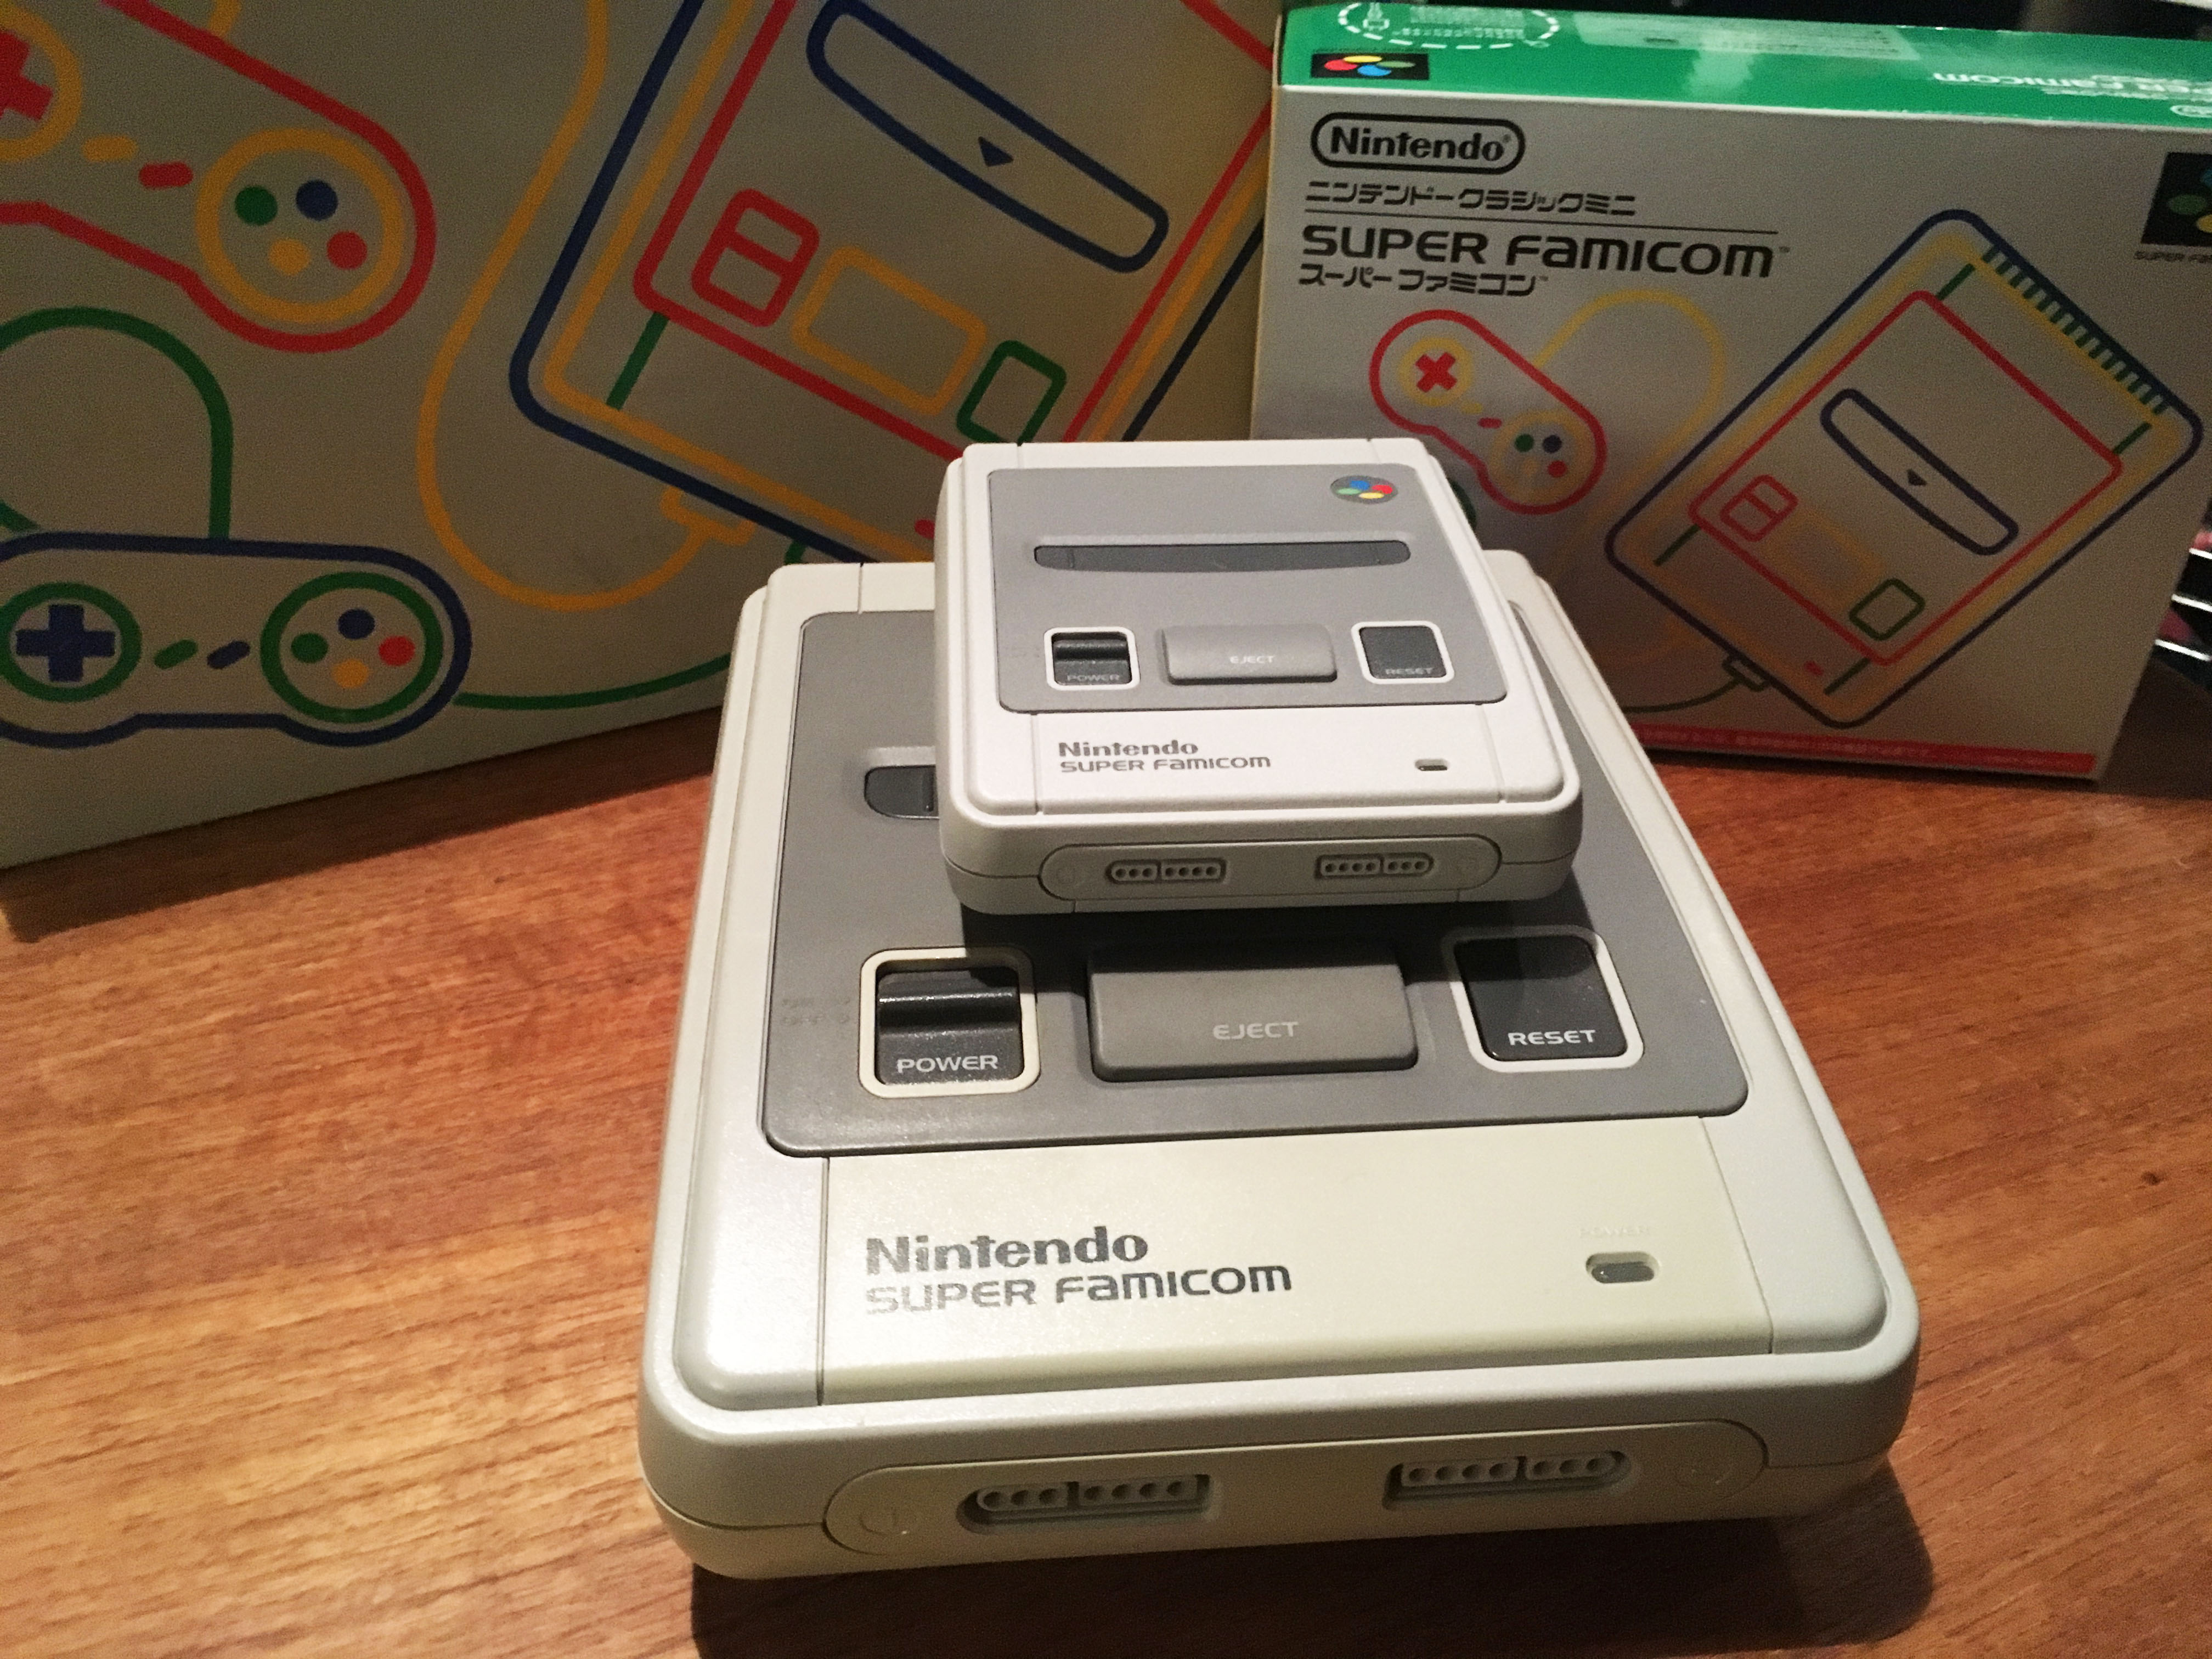 Complete Nintendo Classic Mini collection – with the original 